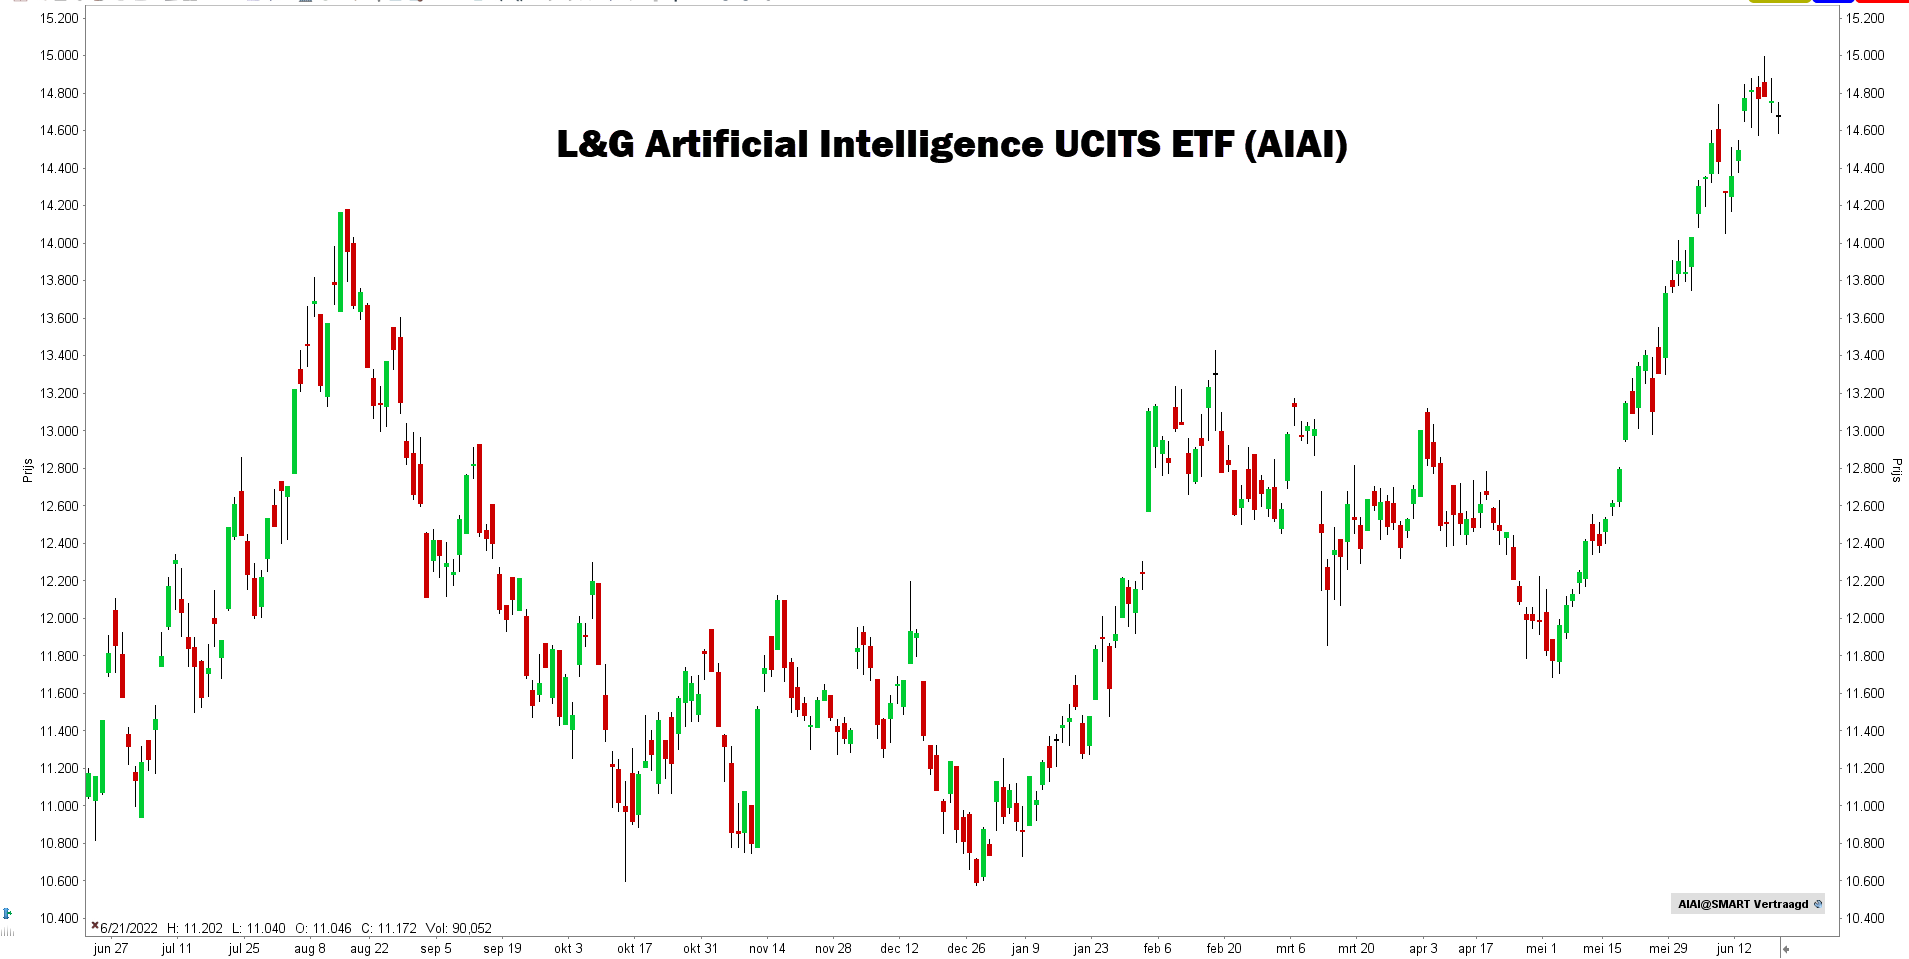 Beste AI-ETF’s - L&G Artificial Intelligence UCITS ETF (AIAI)